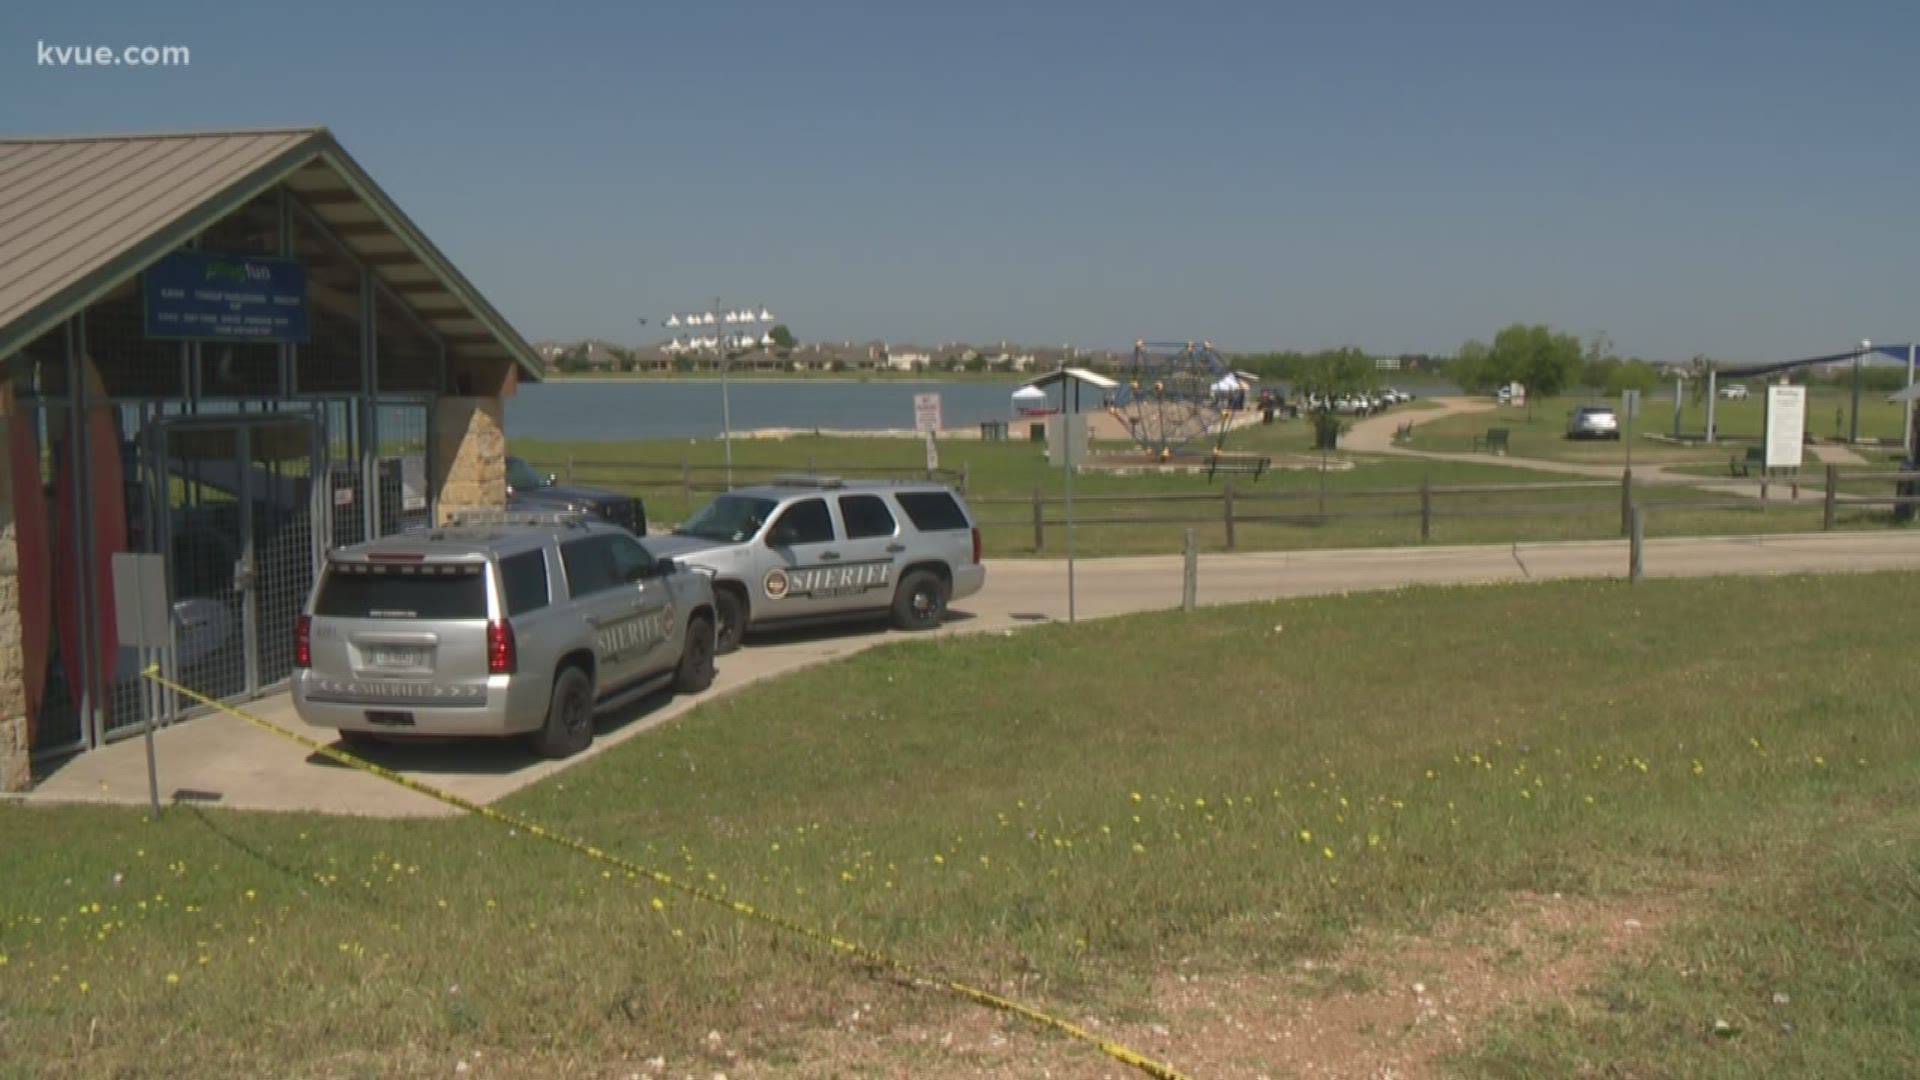 The Travis County Dive team found the body of the missing swimmer at Lake Pflugerville at approximately 4:15 p.m. Thursday, according to the Pflugerville Police Department.